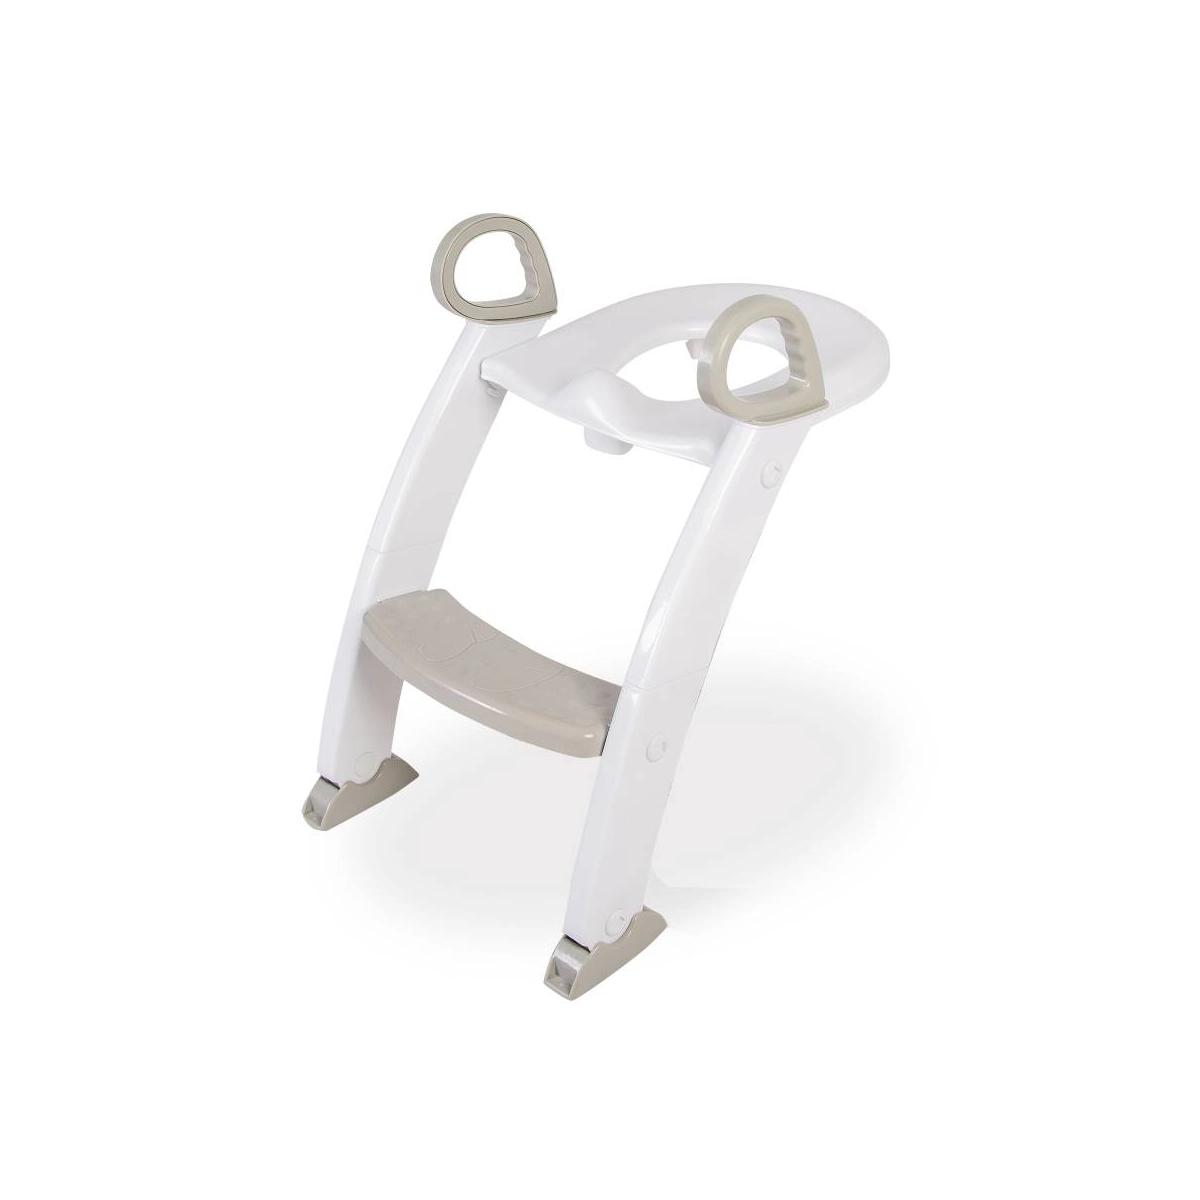 Image of Red Kite Step & Sit Toilet Trainer - Grey